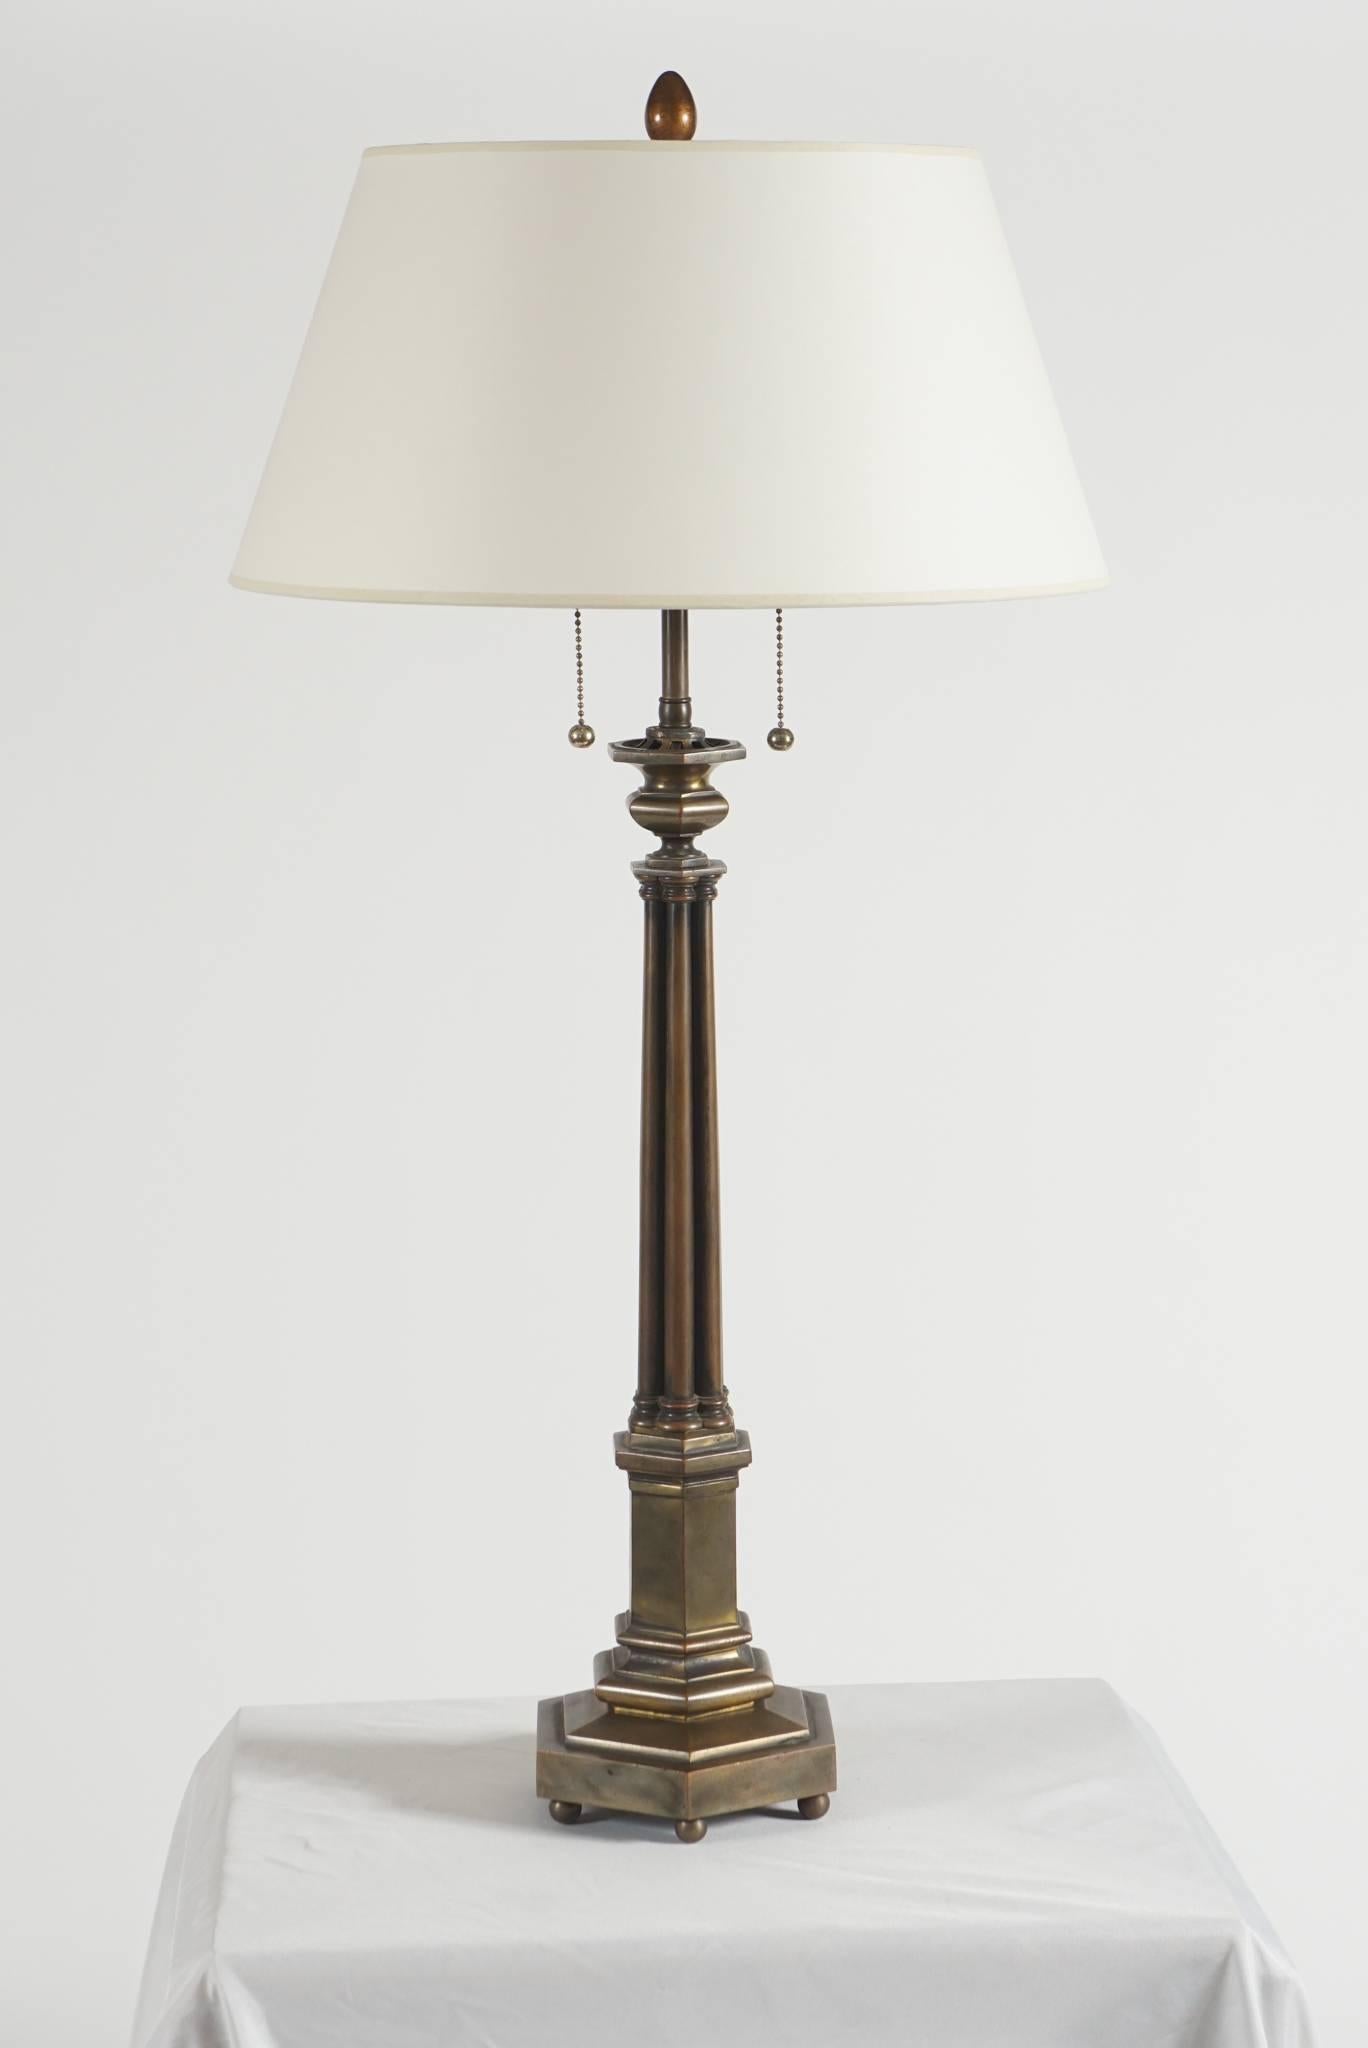 An elegant, circa 1840 solid bronze table lamp of hexagonal form with urn surmounting clustered column on stepped plinth base on ball feet by the Boston, Massachusetts firm of Henry N. Hooper & Company, a leading purveyor of lighting fixtures in